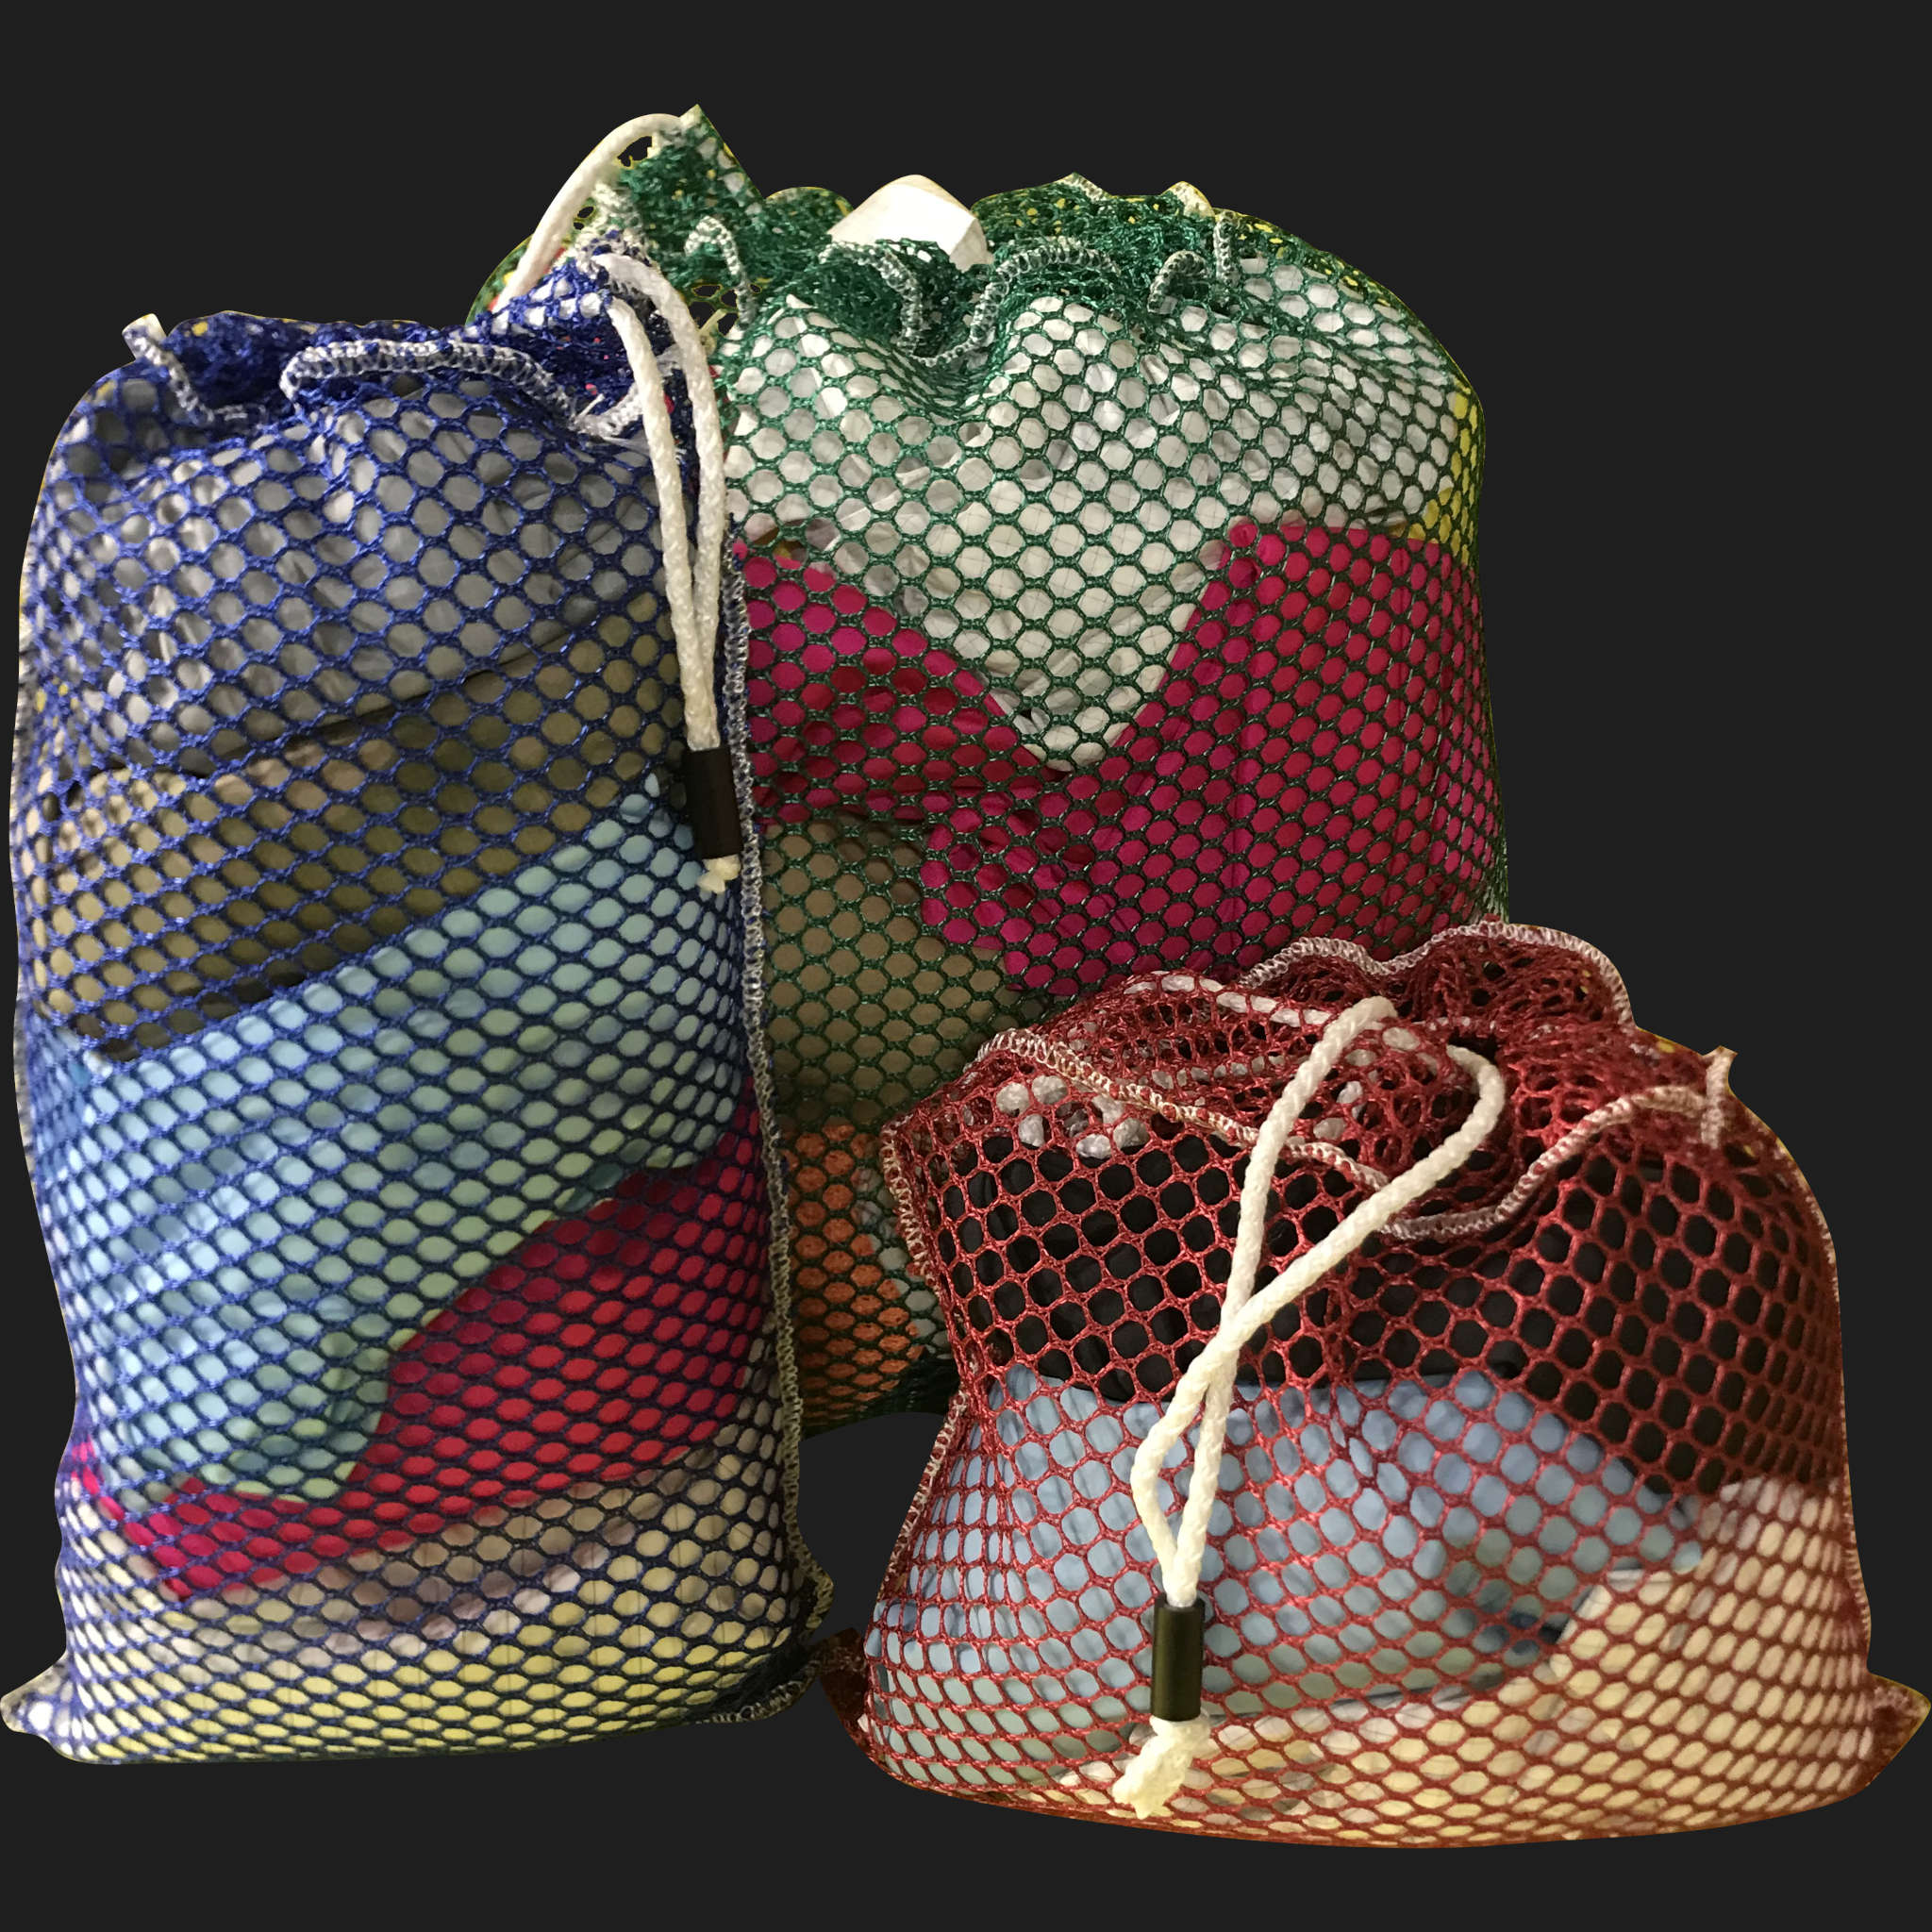 28" x 48" Customized Mesh-Net-Laundry Bags Heavy Duty with Cord and barrellock closure